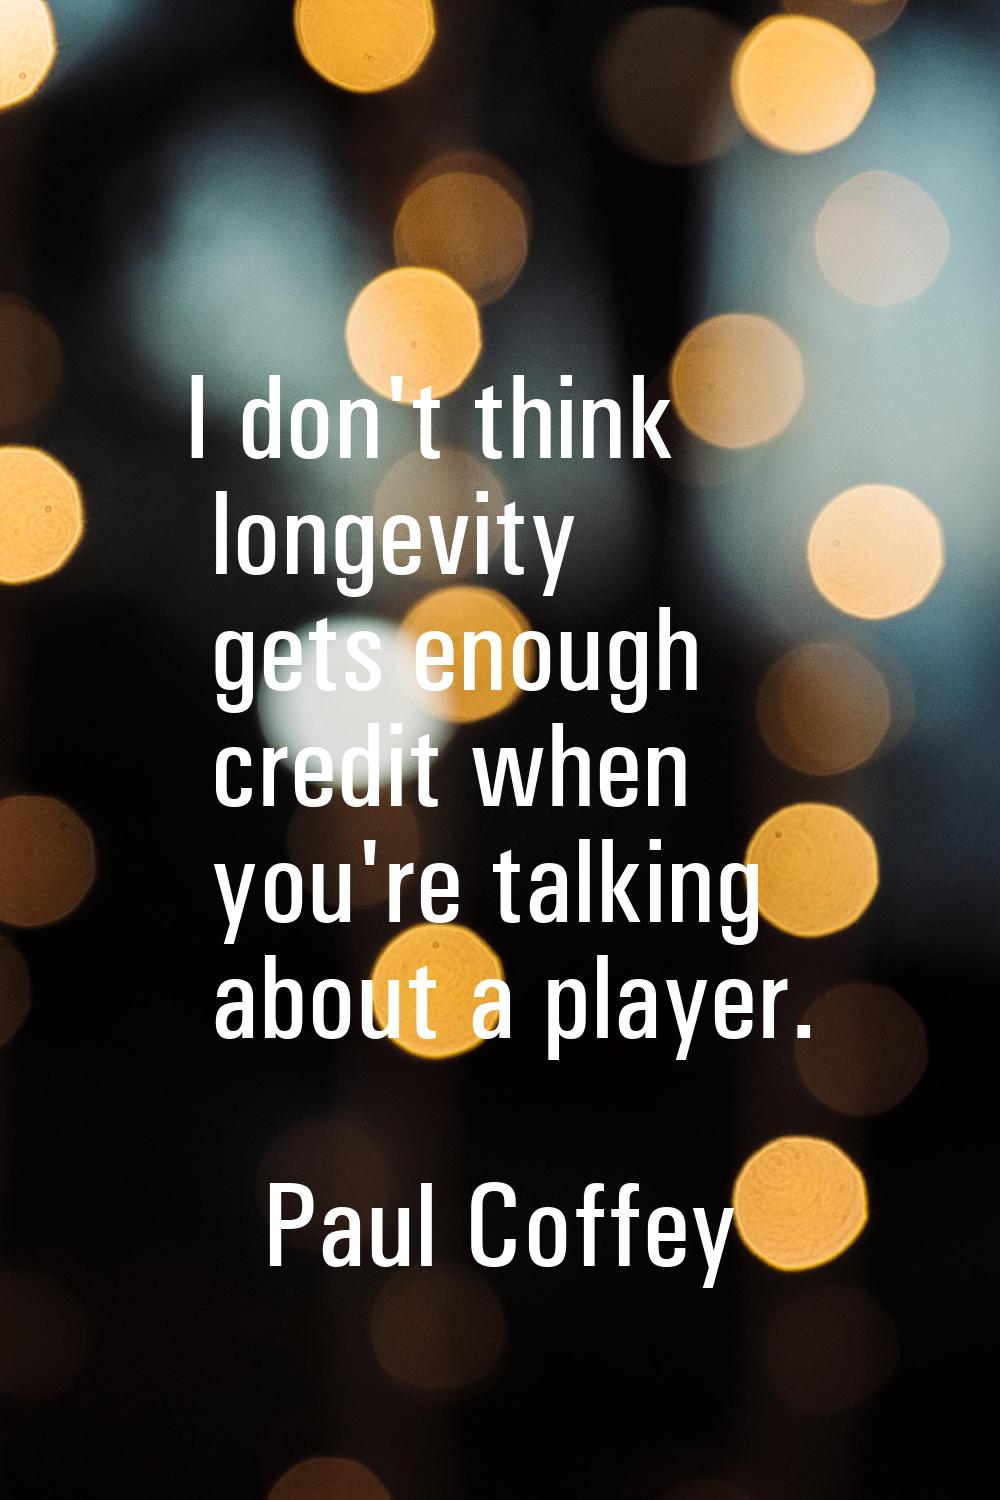 I don't think longevity gets enough credit when you're talking about a player.